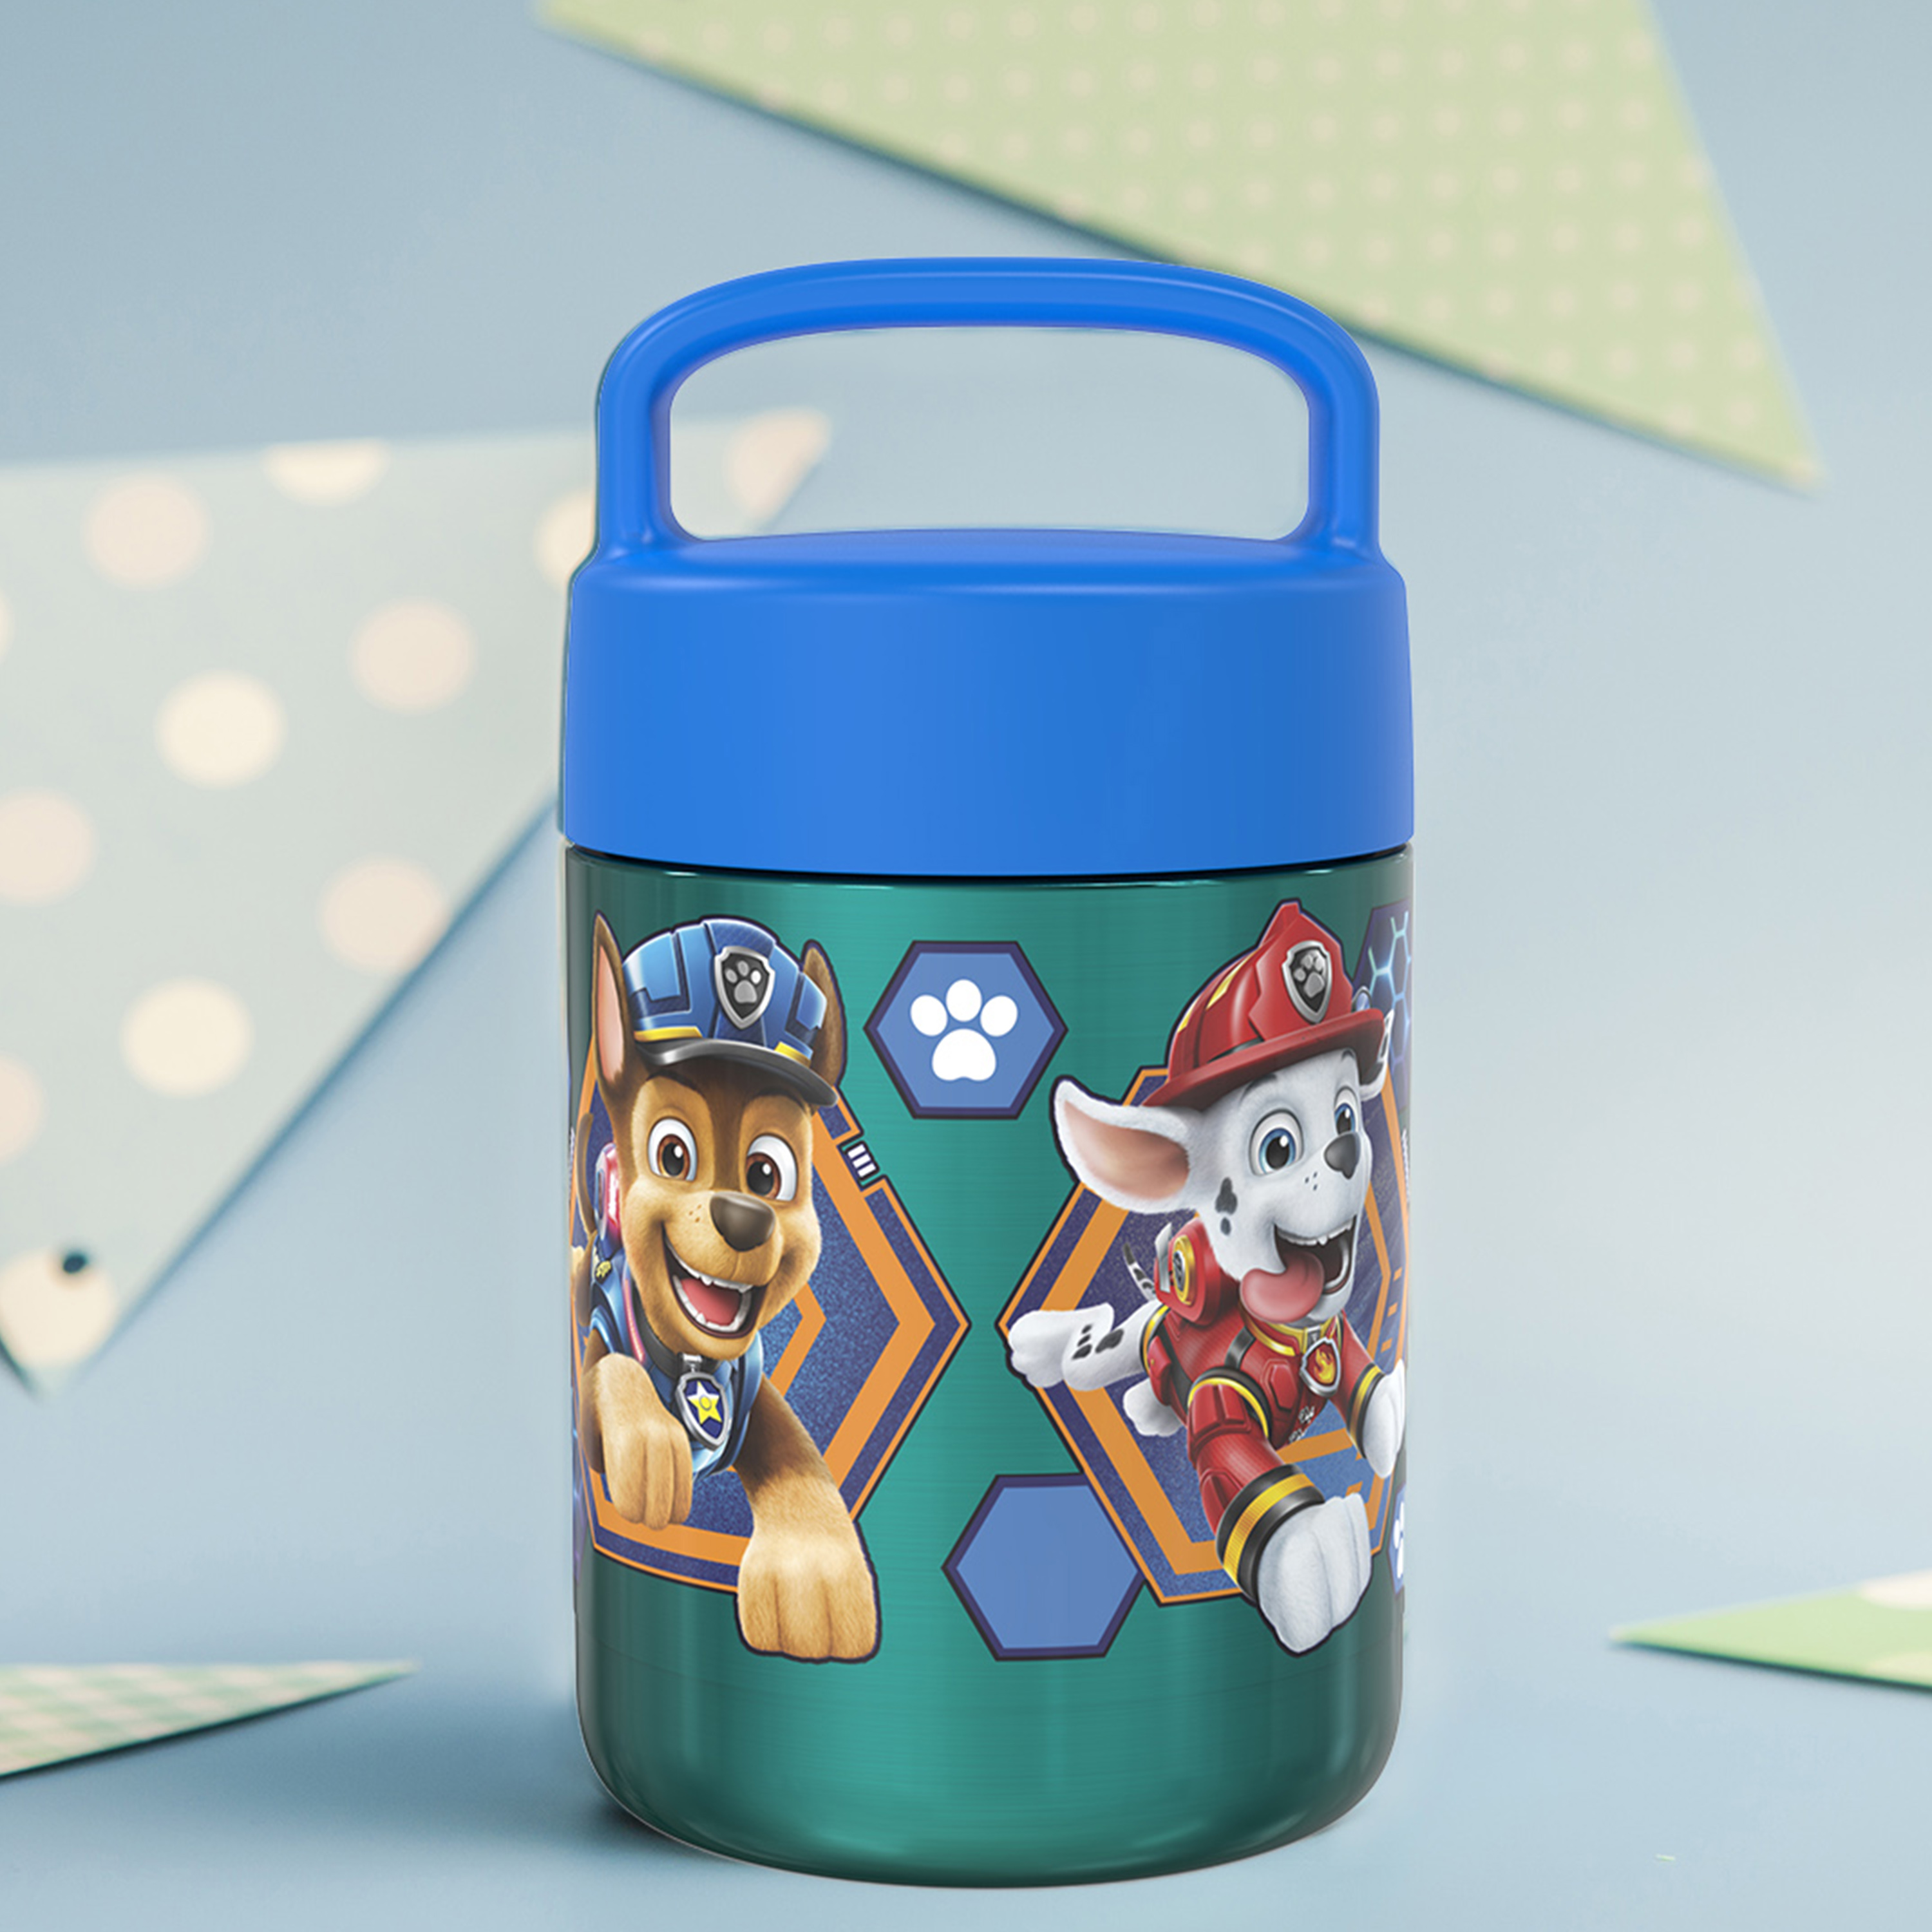 Paw Patrol Movie Reusable Vacuum Insulated Stainless Steel Food Container, Marshall, Chase and Friends slideshow image 6